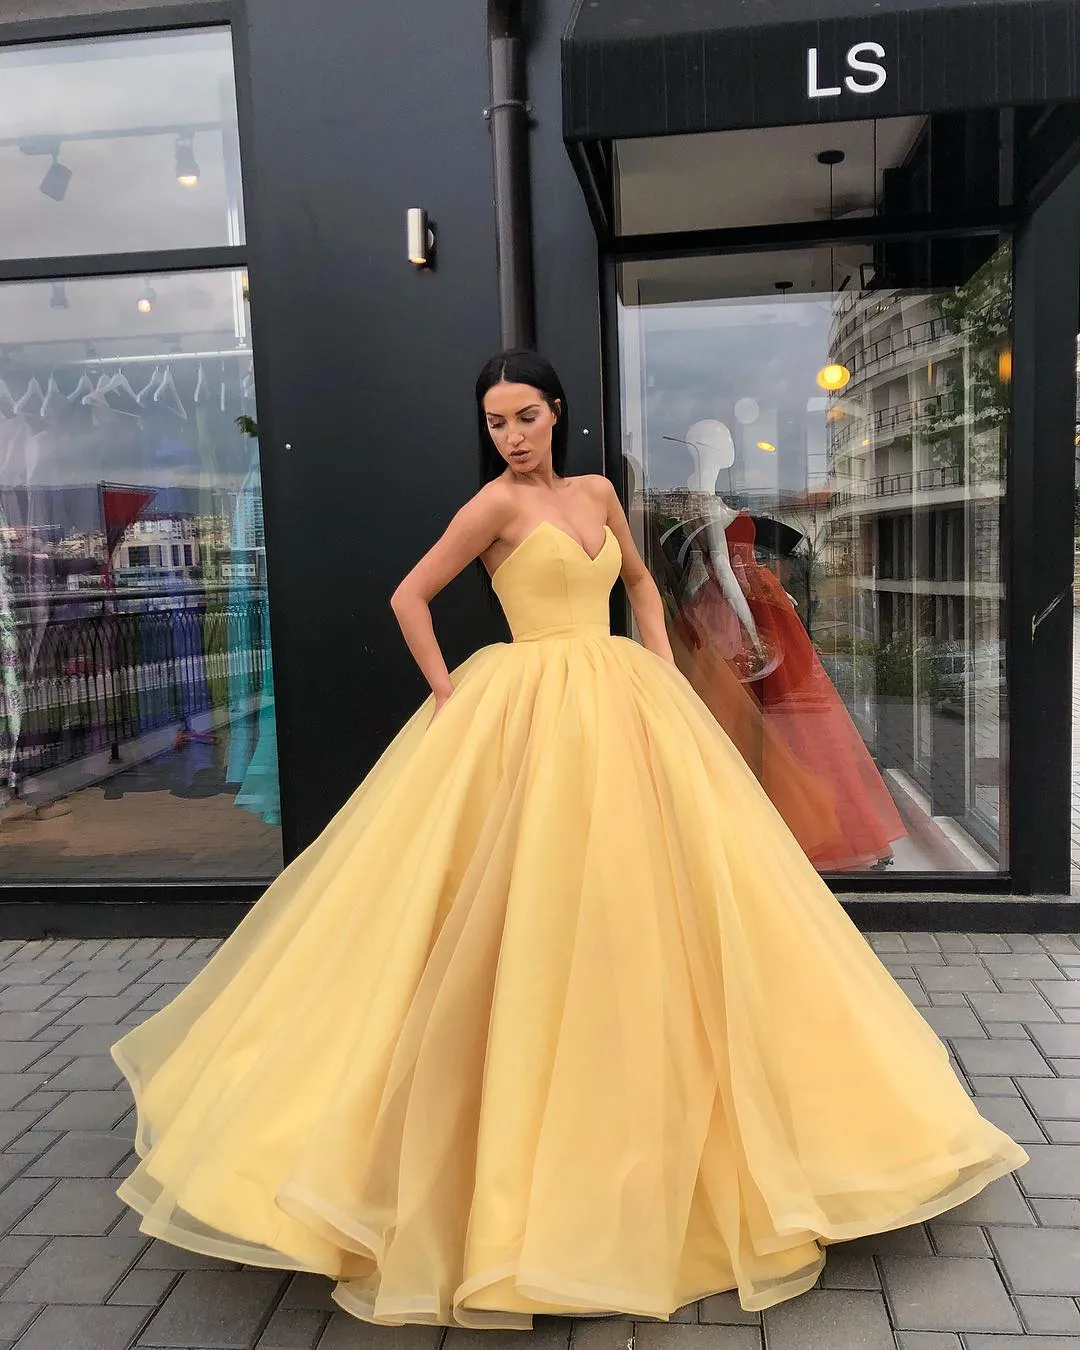 Christian Siriano Auctioning Off a Custom Ball Gown for Ukraine Relief